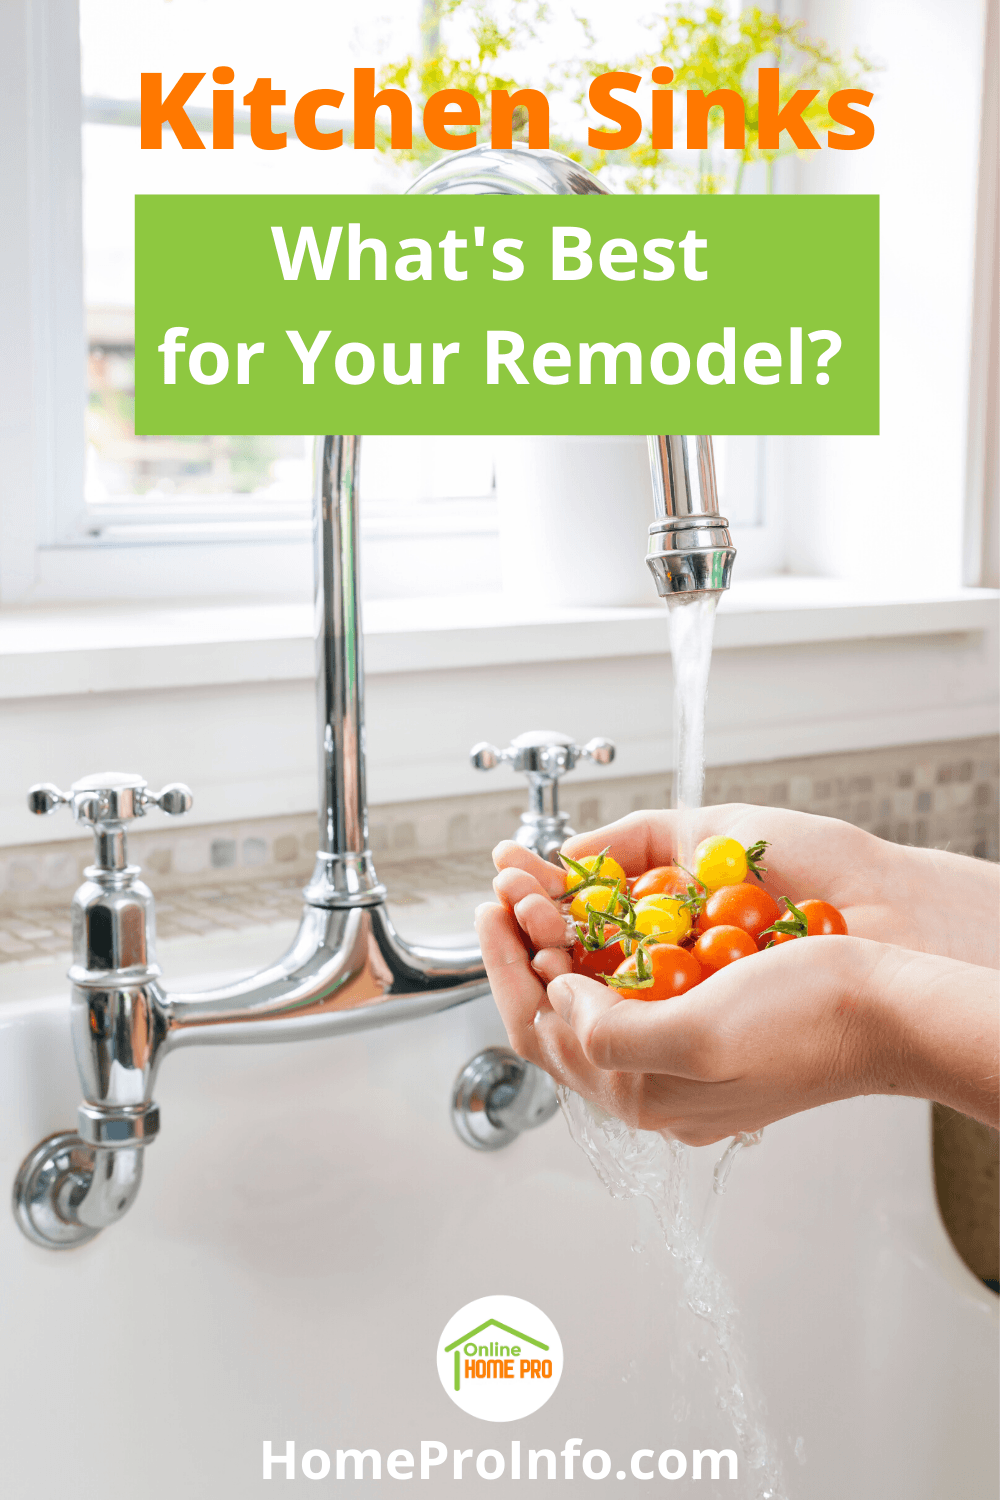 kitchen sinks and remodeling